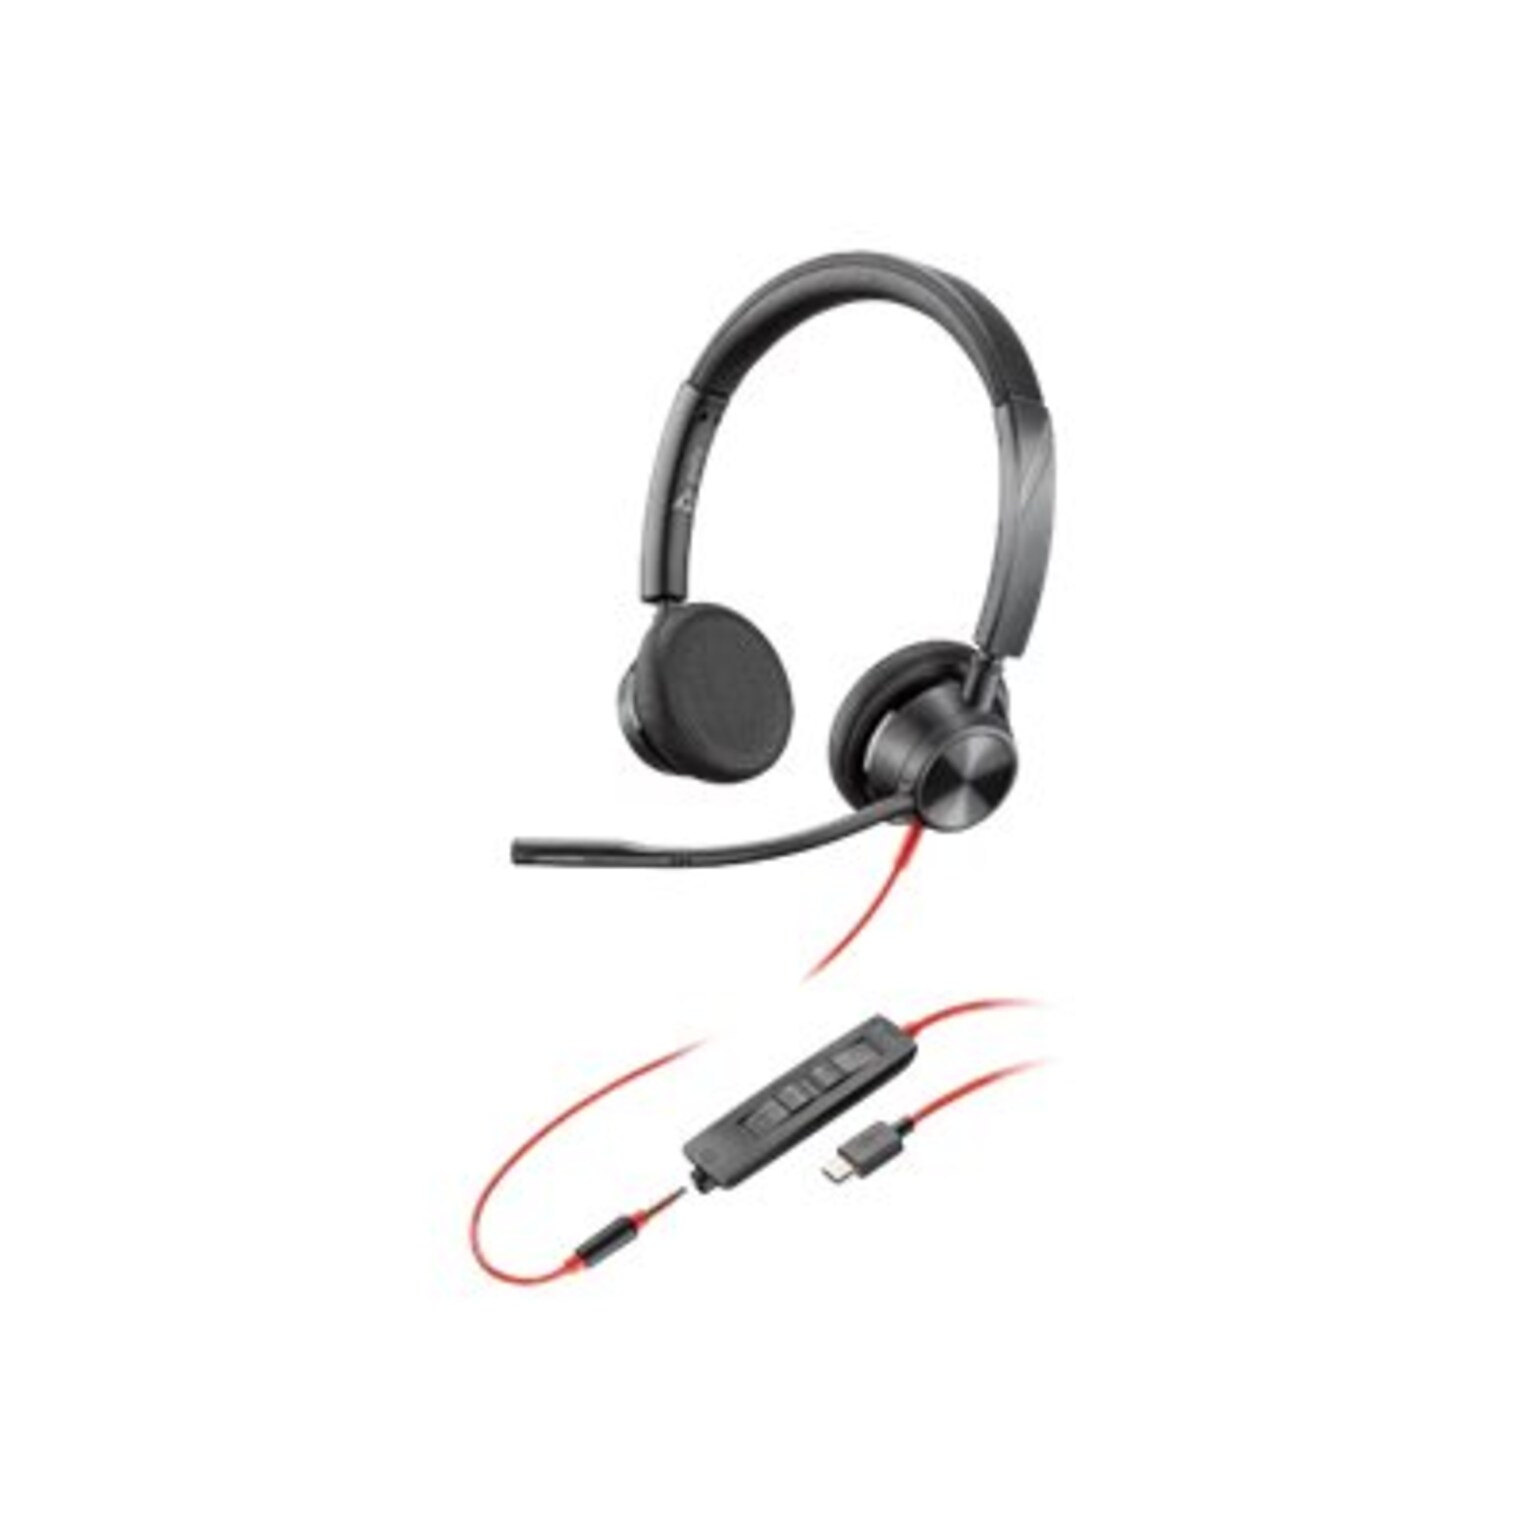 Plantronics Blackwire 3325 Wired Stereo On Ear Computer Headset, Black (214017-01)